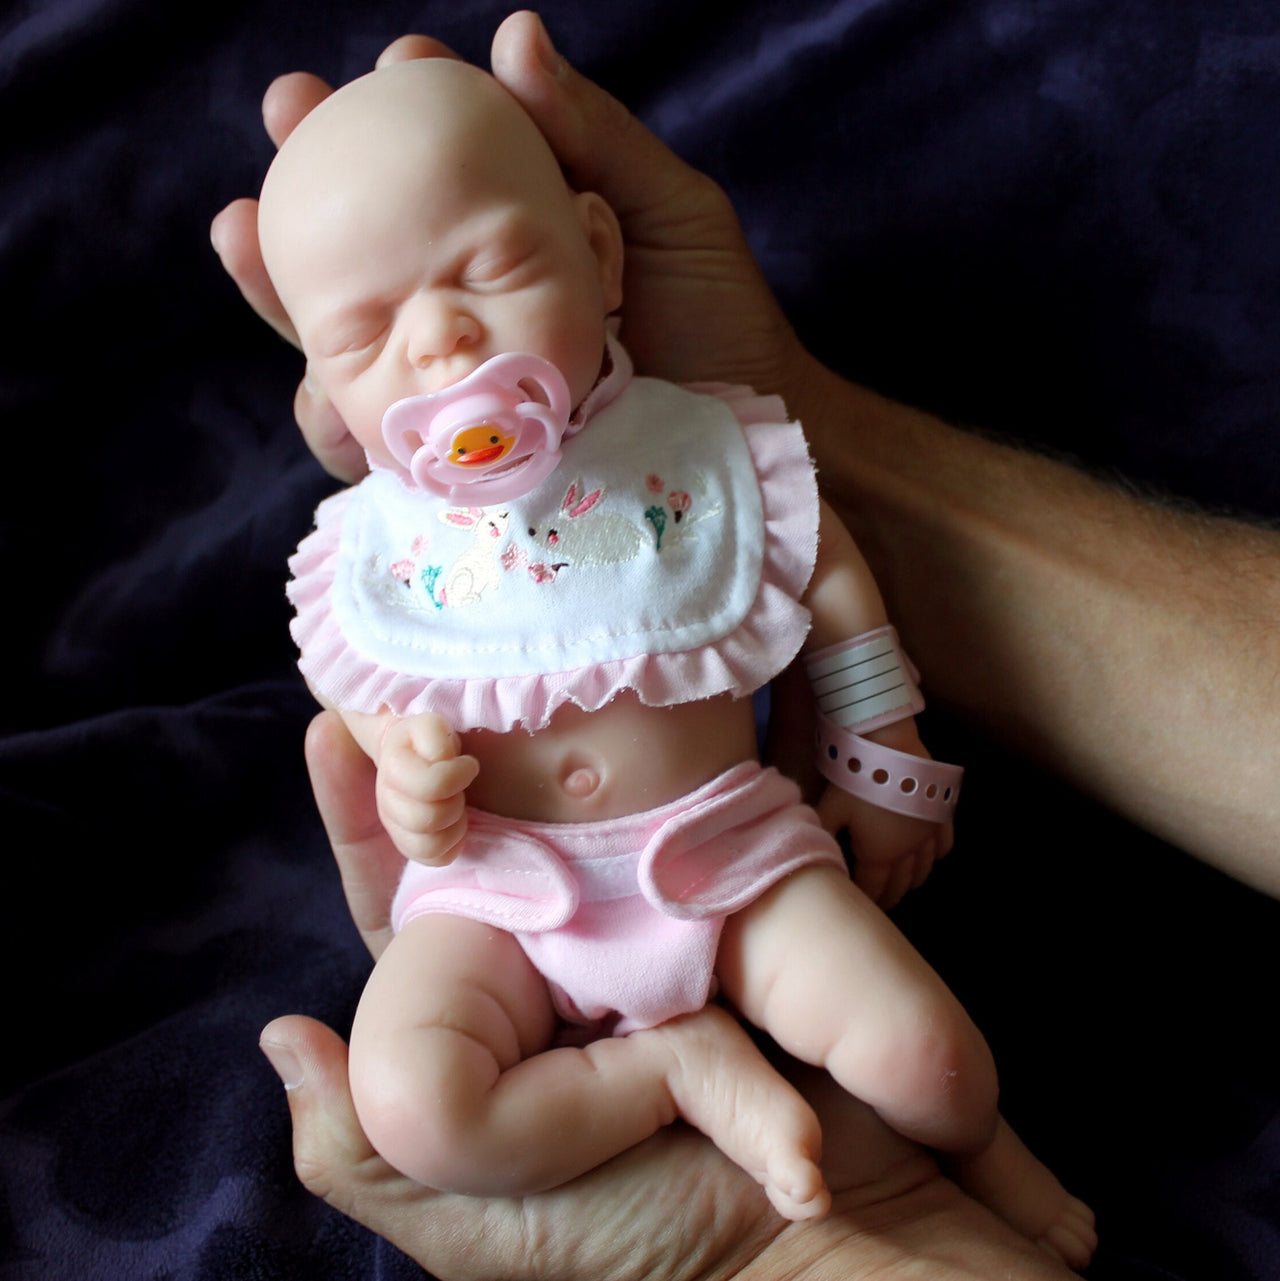 12" Full Silicone Baby Doll Body Reborn Preemie 2.6lbs Platinum Silicone Dolls Realistic Real Lifelike Weighted Babies Therapy Elderly gifts